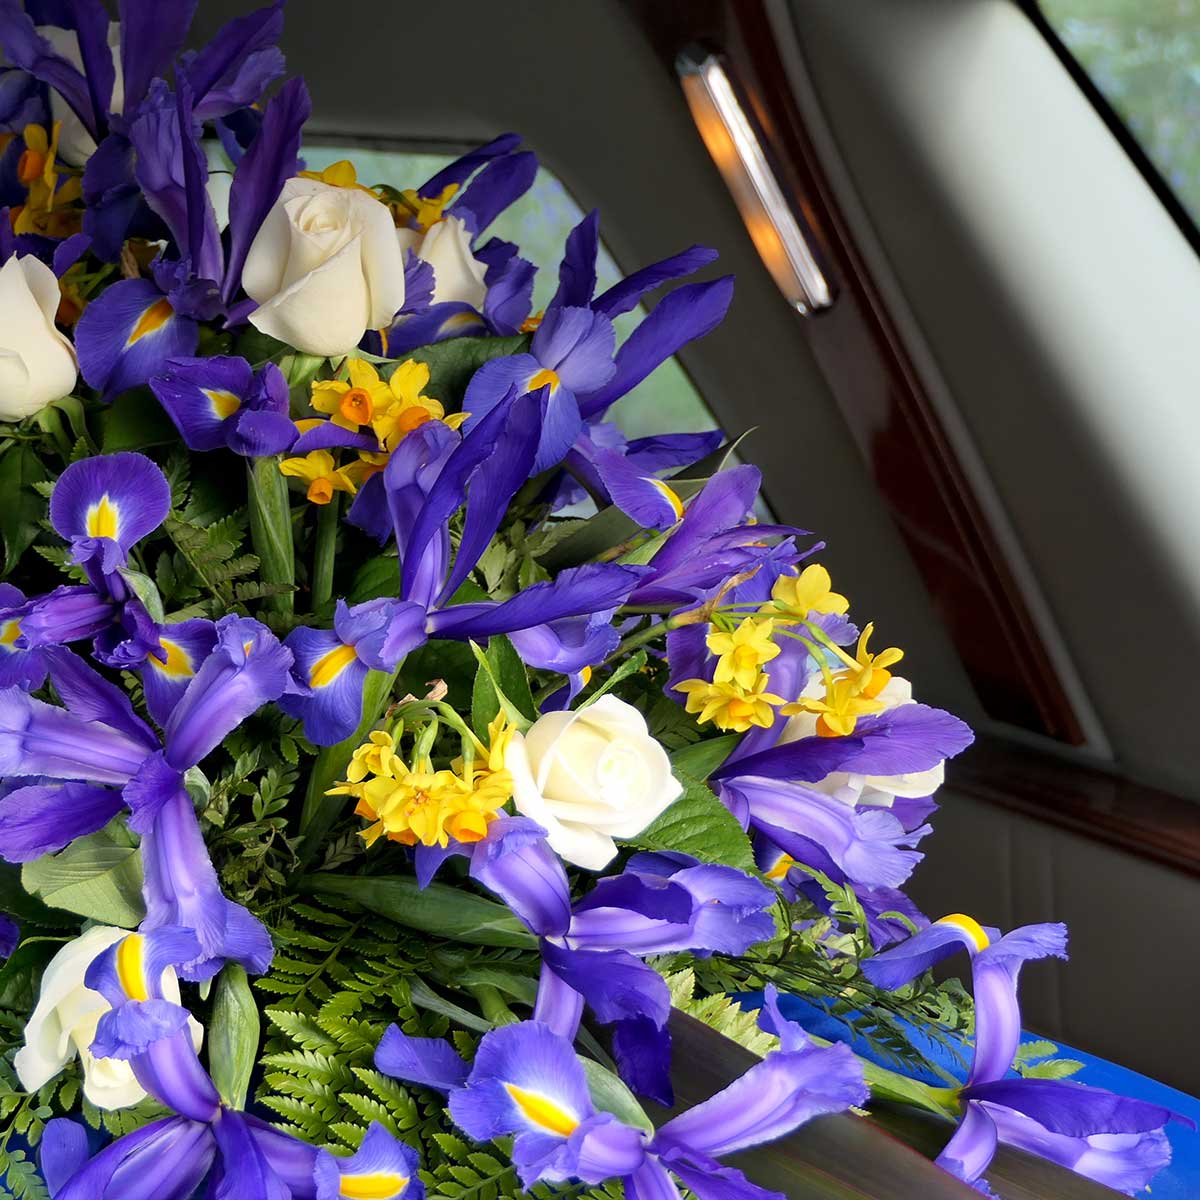 Burial flowers funeral services options